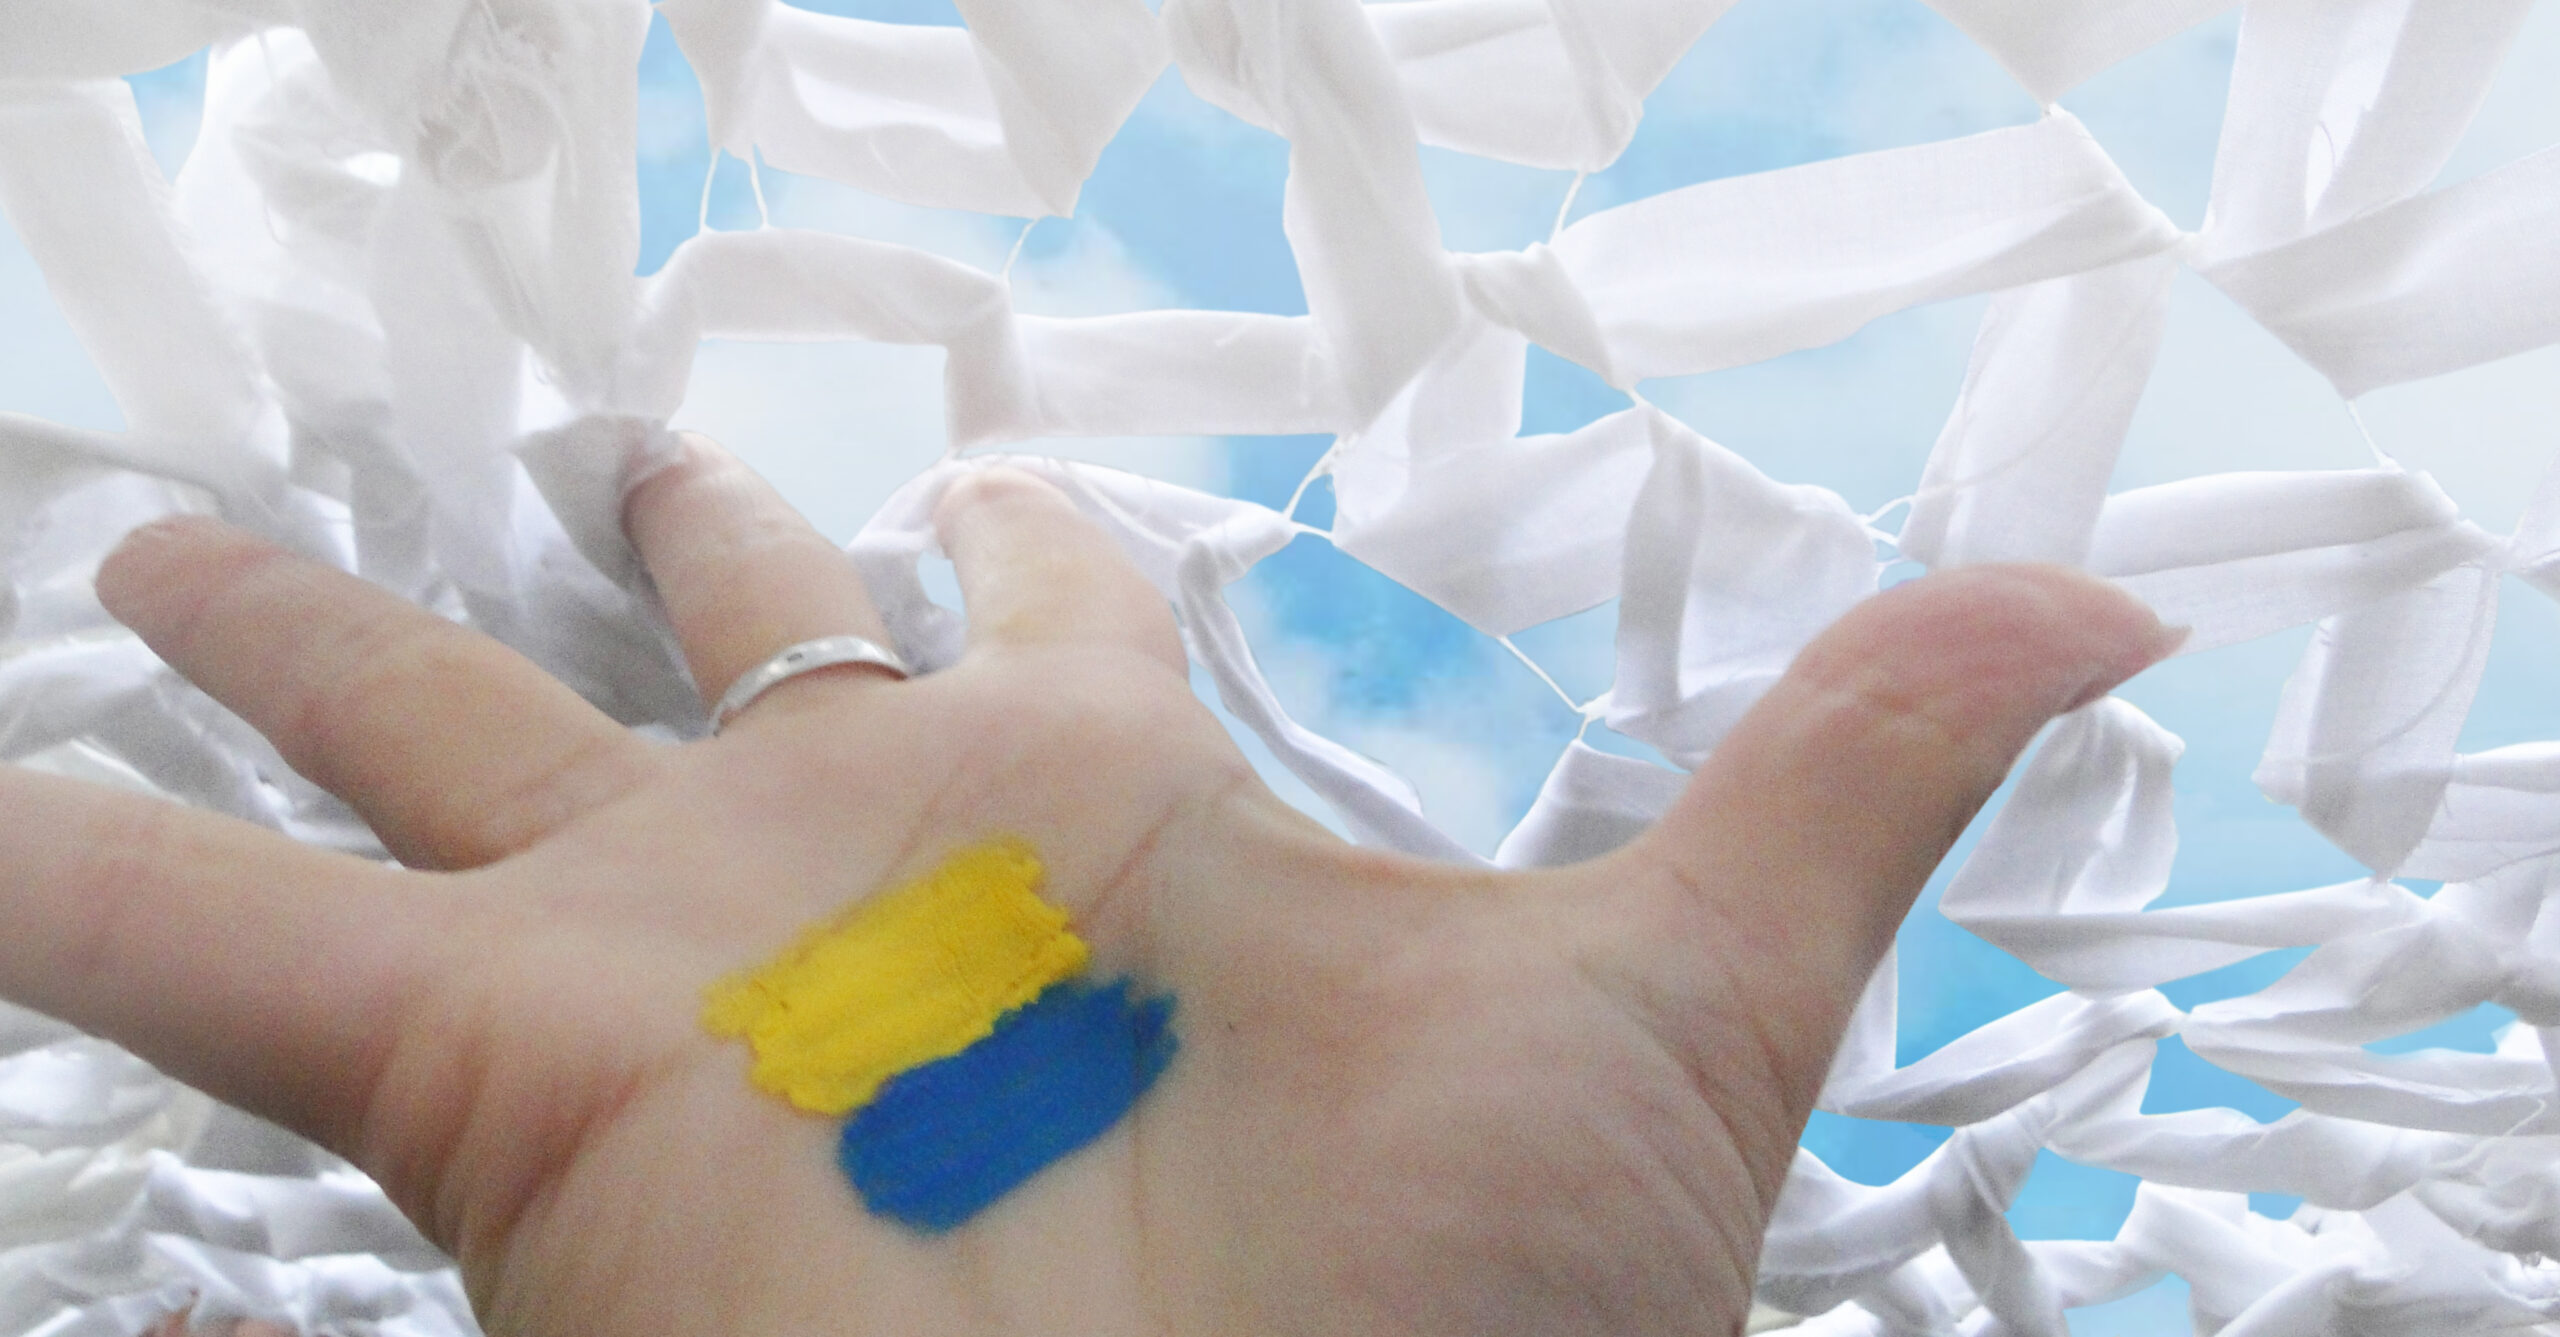 Image of the Ukrainian flag painted on the inside of a hand. The hand is trying to get through a barrier made of white cloth. Image was featured in the Safety Net exhibit.